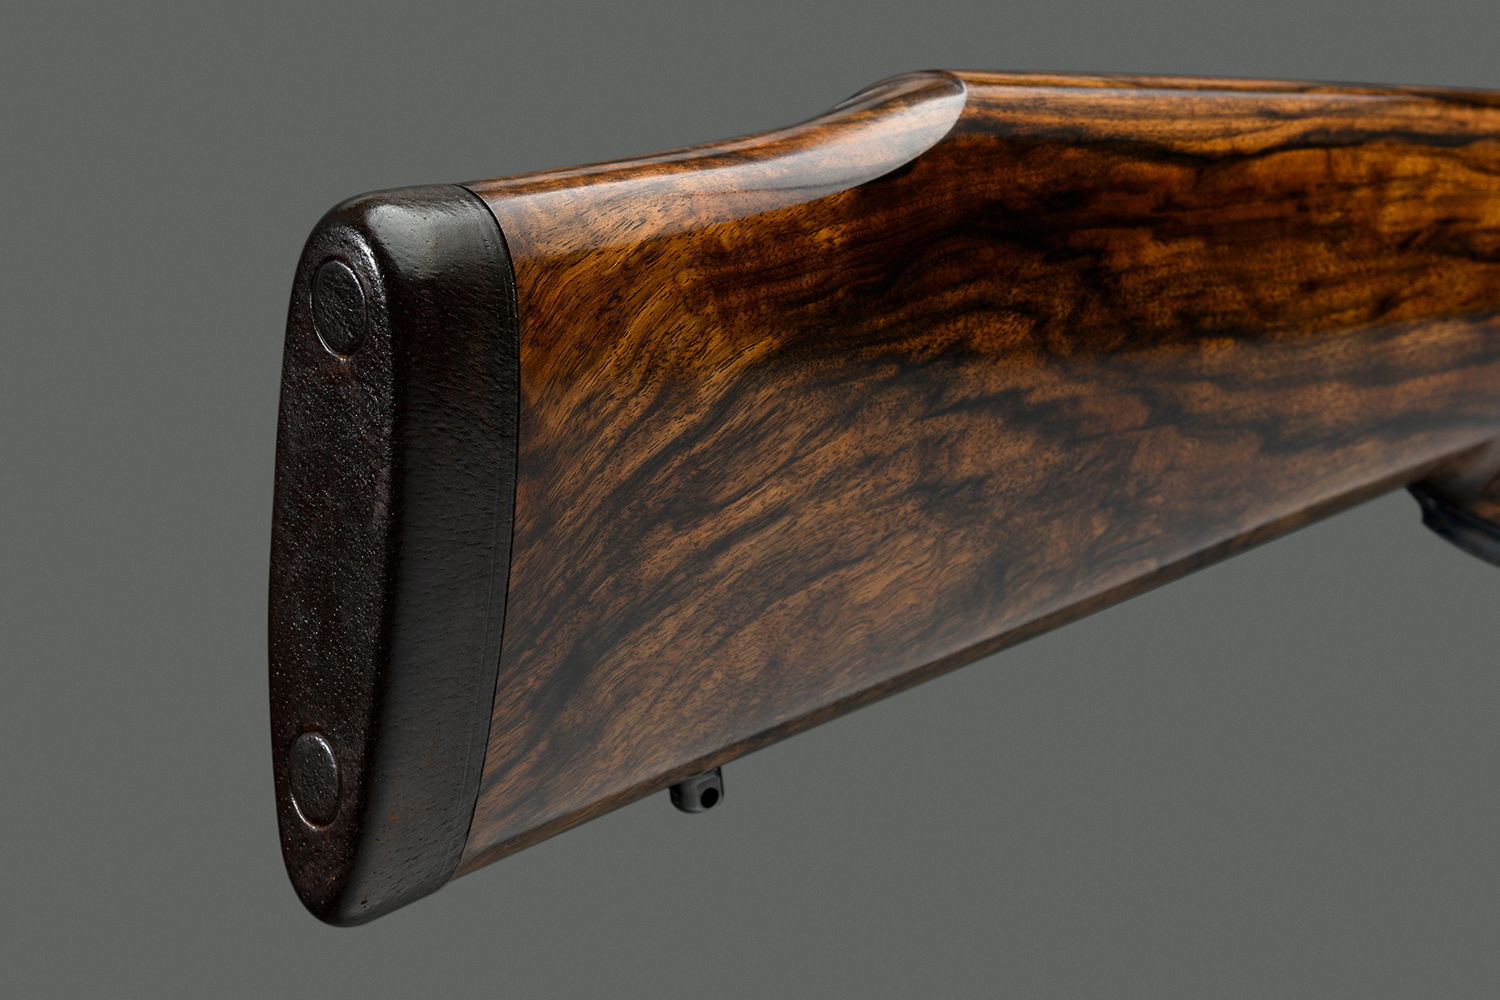 A French Walnut stock on the Griffin and Howe Highlander.